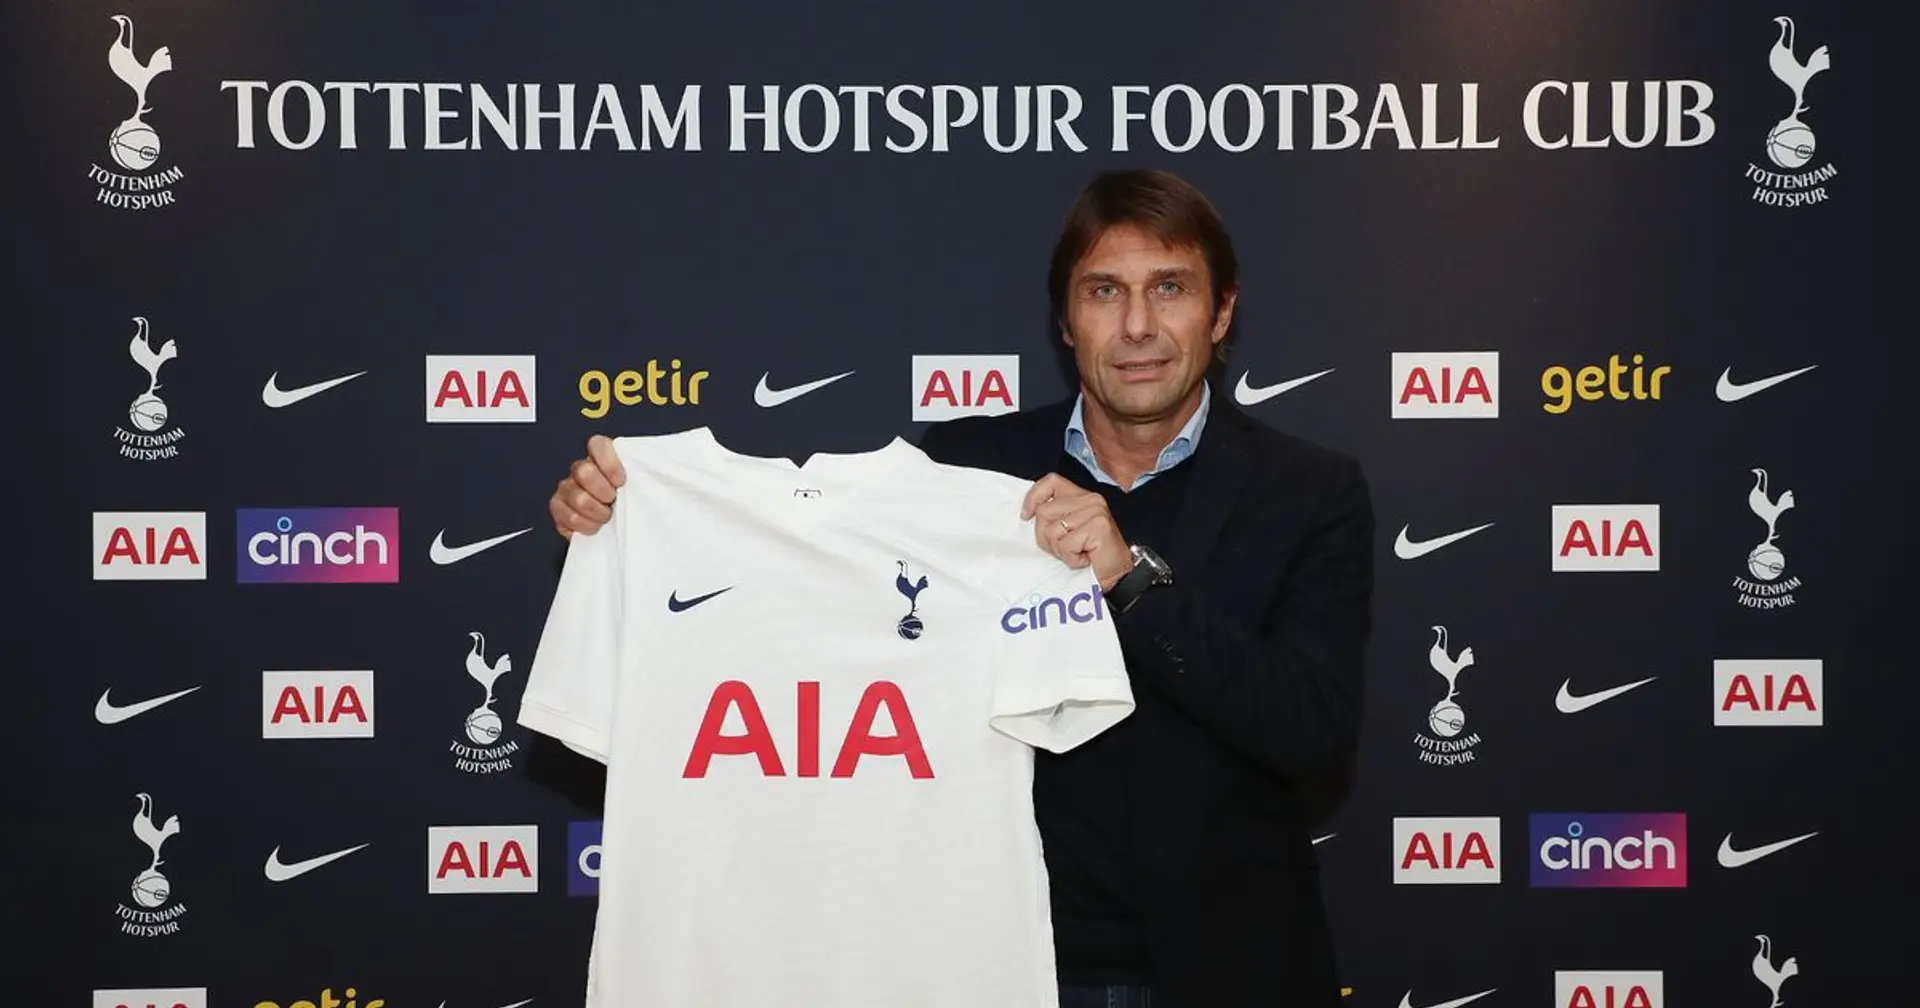 'It will only show how more incompetent our board is': Man United fans react to Conte's appointment at Spurs